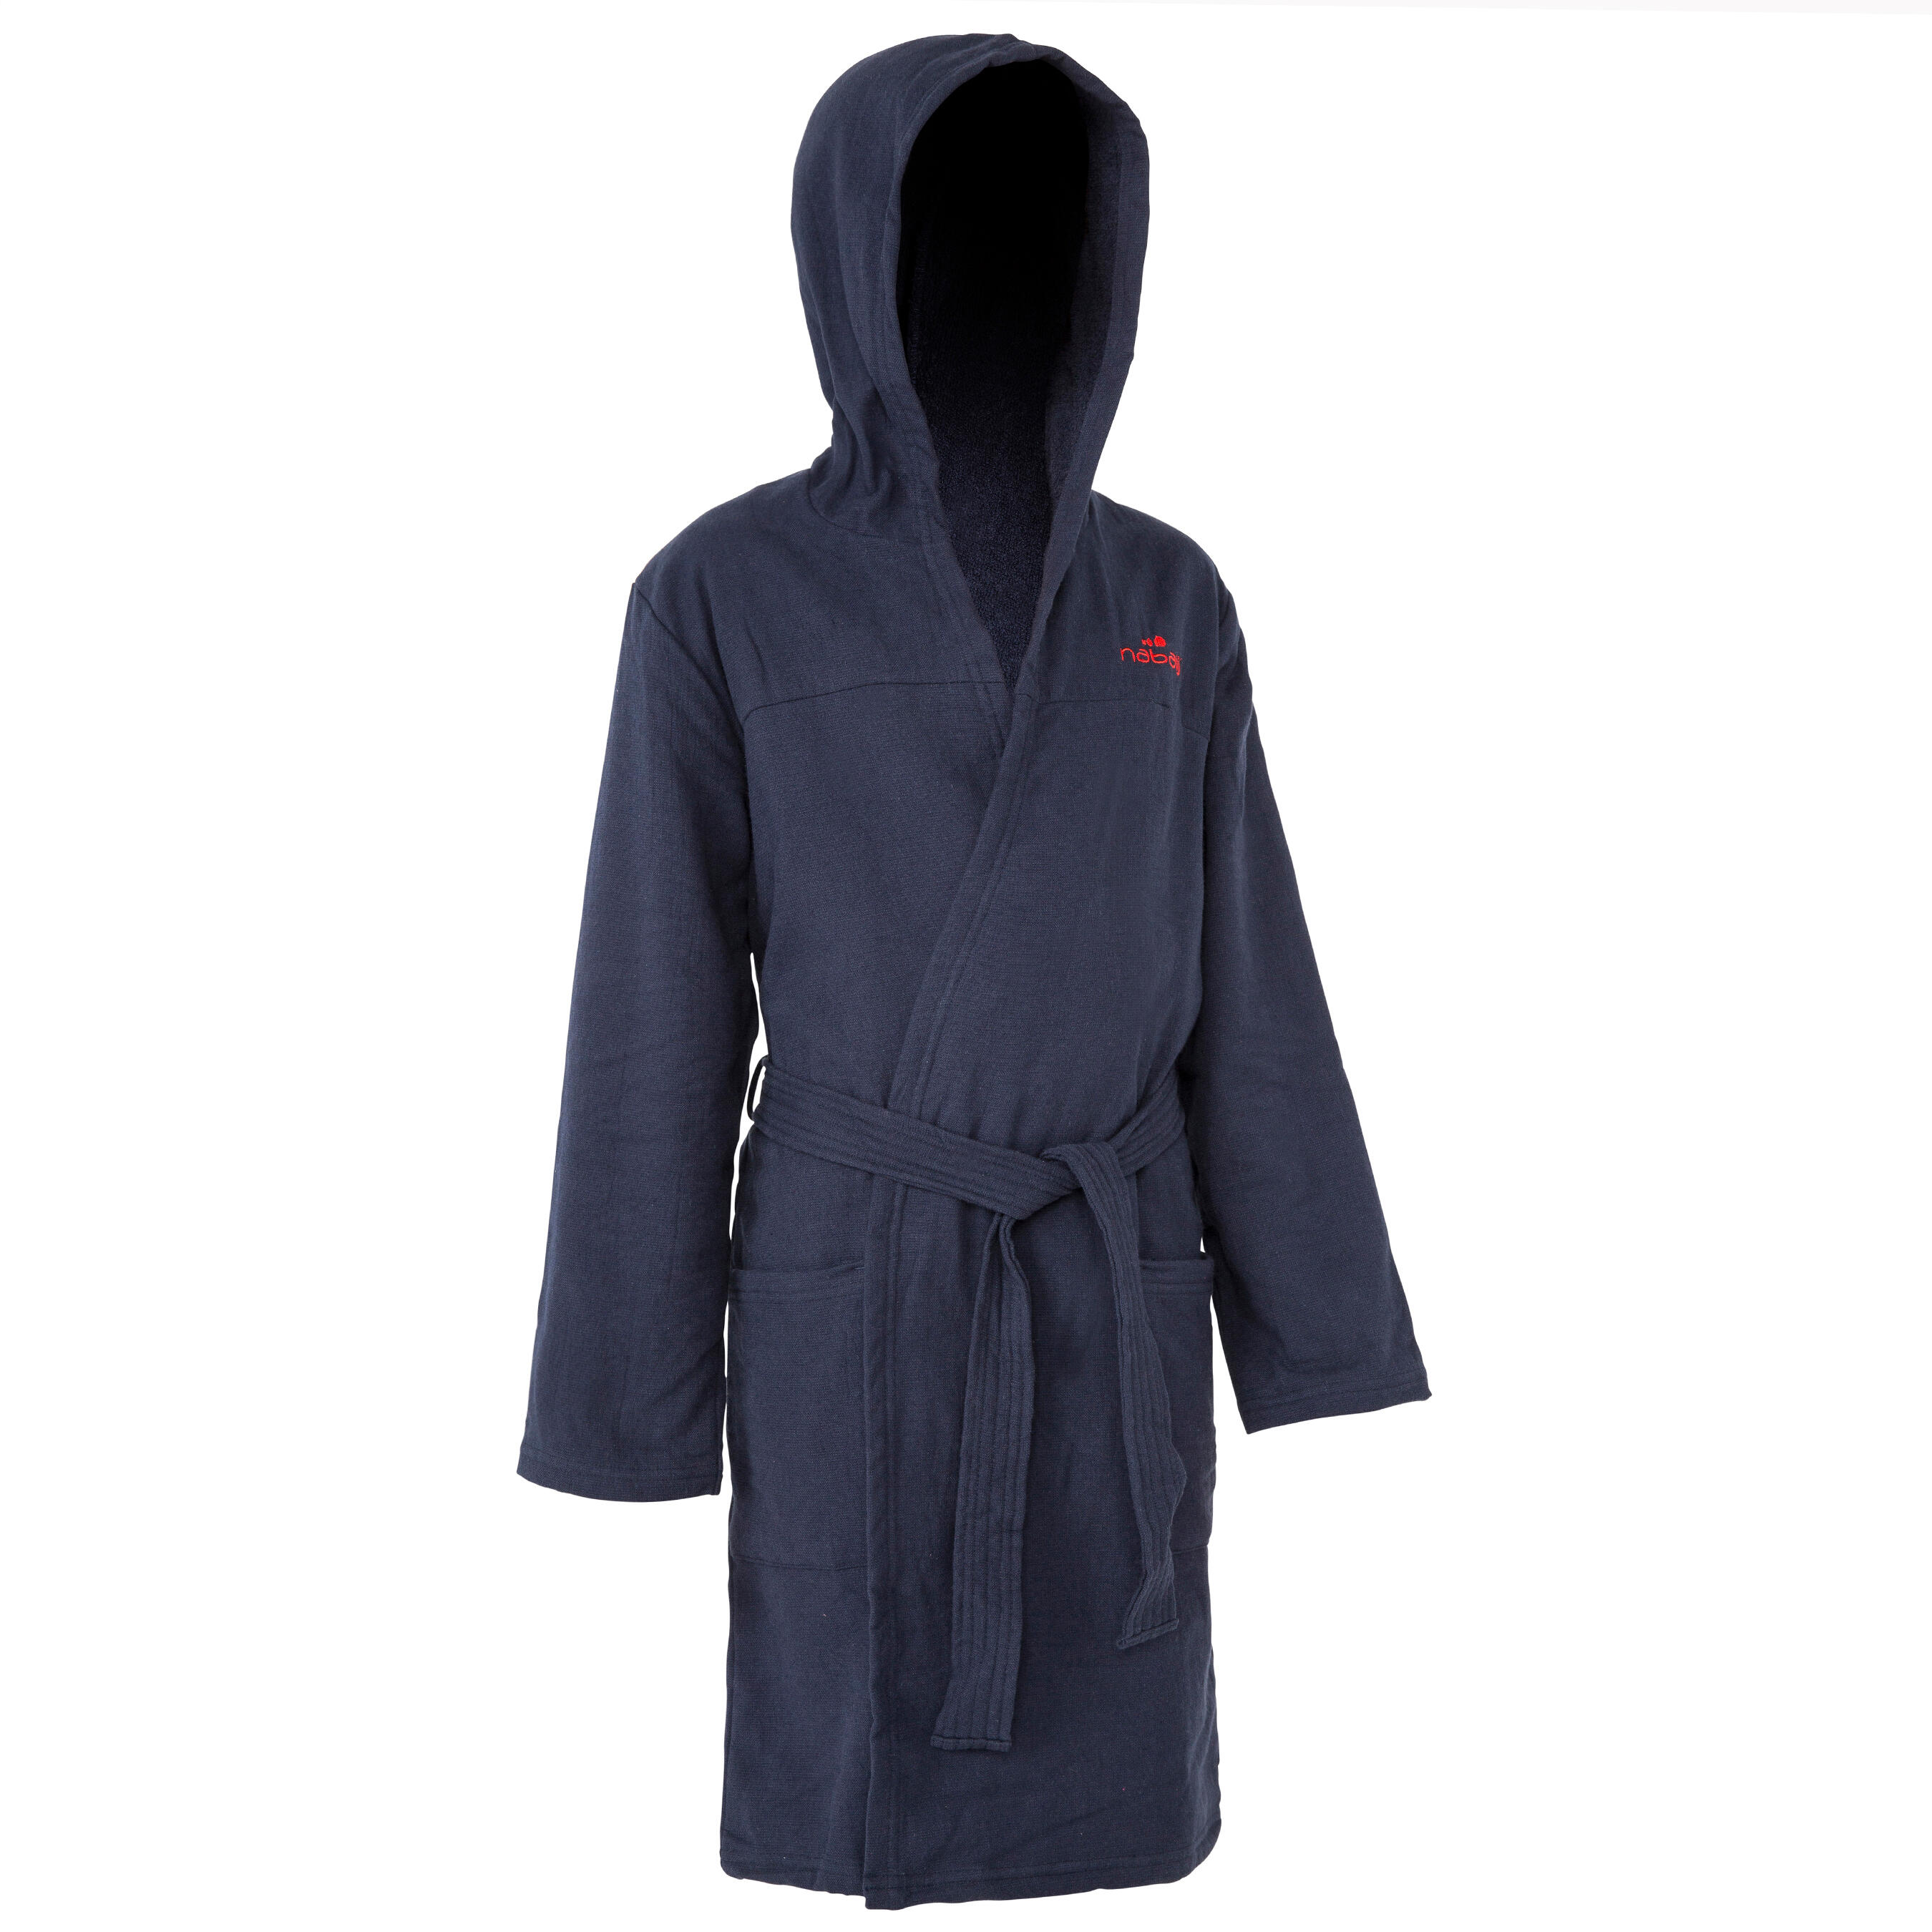 Buy Navy Blue Towels  Bath Robes for Home  Kitchen by Hot Gown Online   Ajiocom